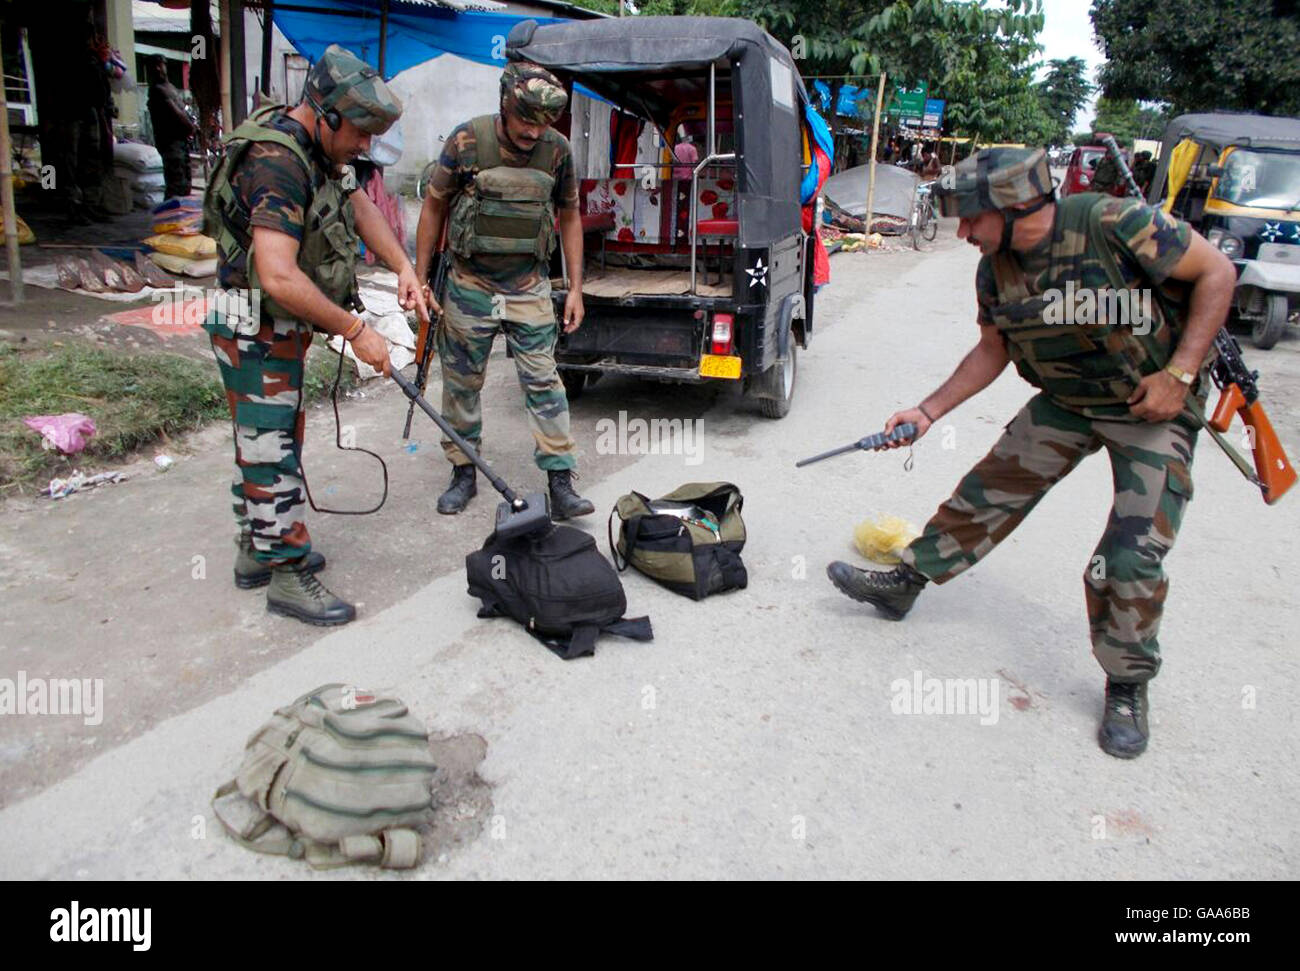 (160805) -- KOKRAJHAR (INDIA), Aug. 5, 2016 (Xinhua) -- Security forces scrutinize items and bags recovered from an auto rickshaw with metal detectors near the site of an attack at Tiniali market in Kokrajhar town, northern Indian state of Assam, on Aug. 5, 2016. At least 14 people were killed and more than 20 others injured after militants opened fire and hurled grenades at a busy market in the northern Indian state of Assam, a top police official said on Friday. (Xinhua/Stringer) Stock Photo